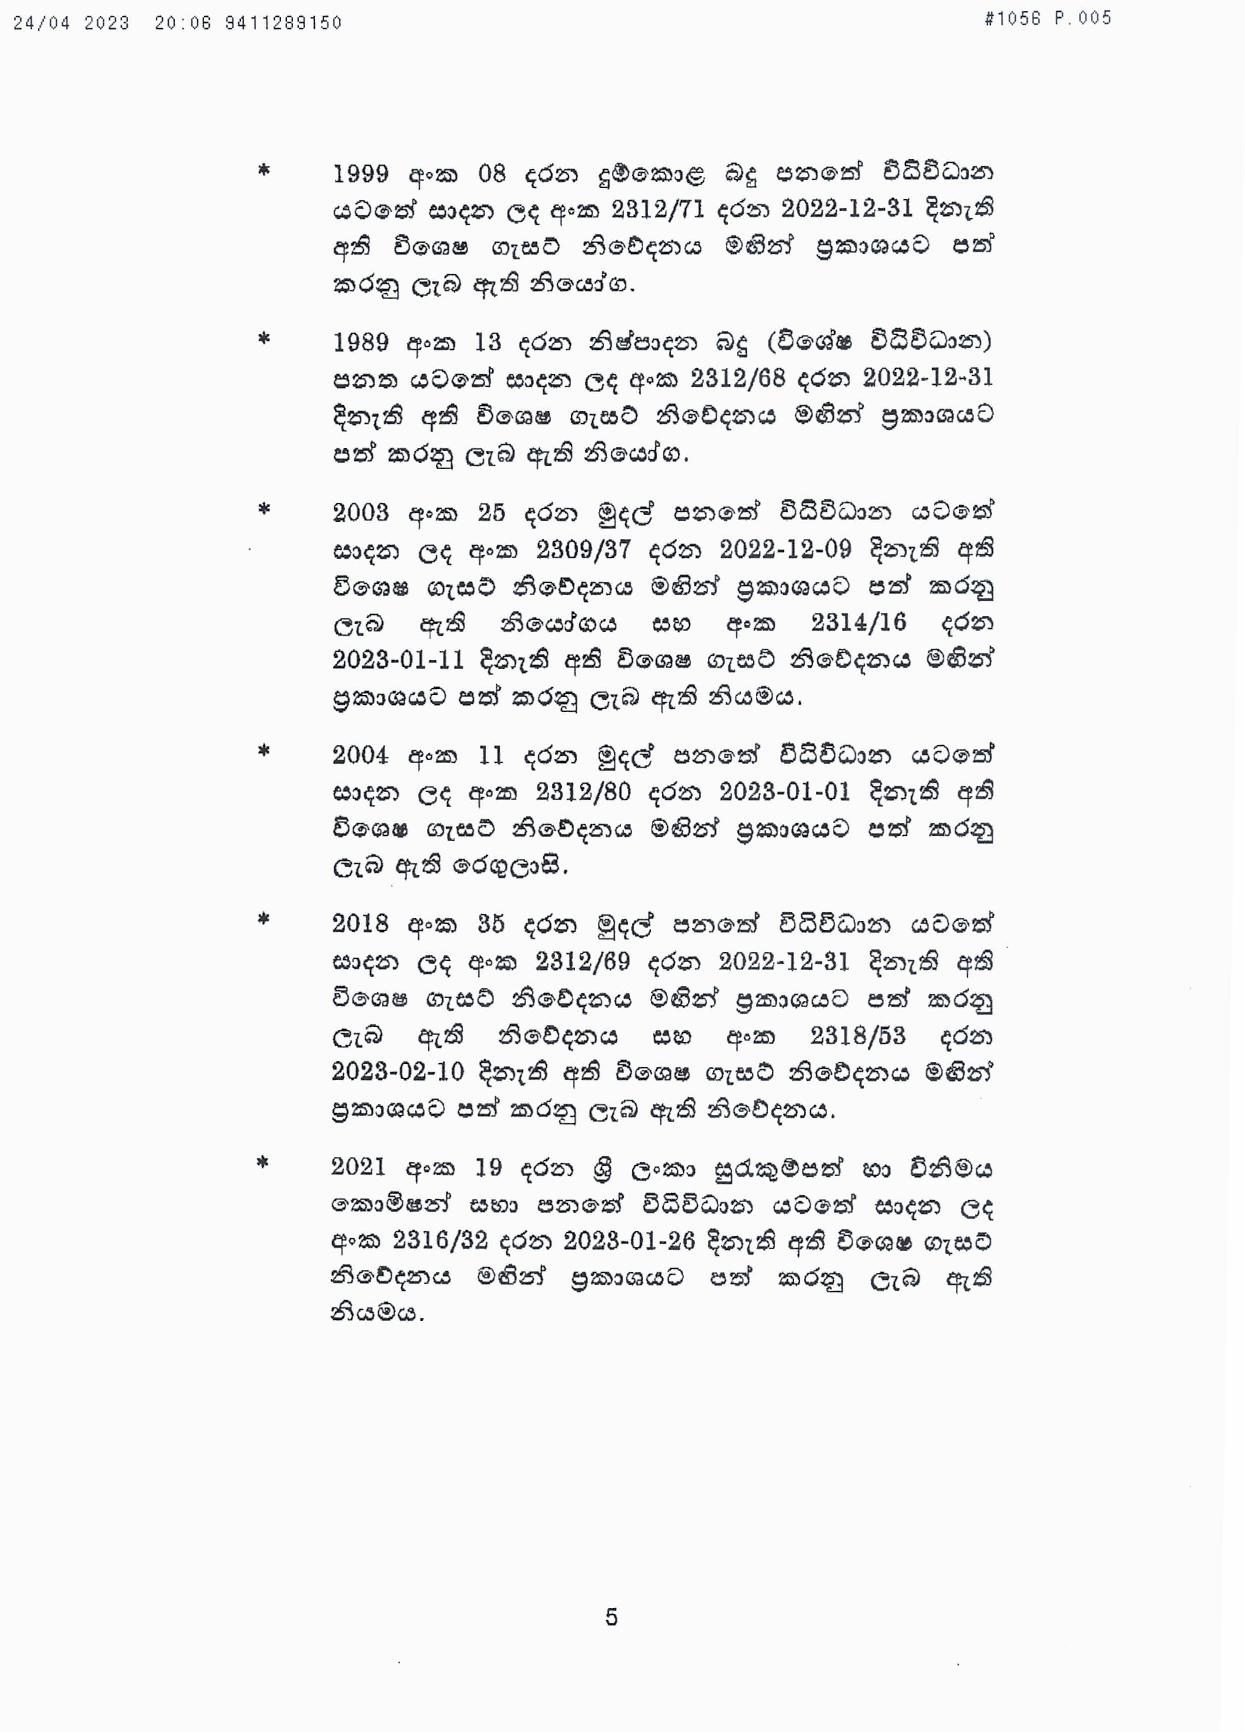 Cabinet Decision 2023.04.24 page 005